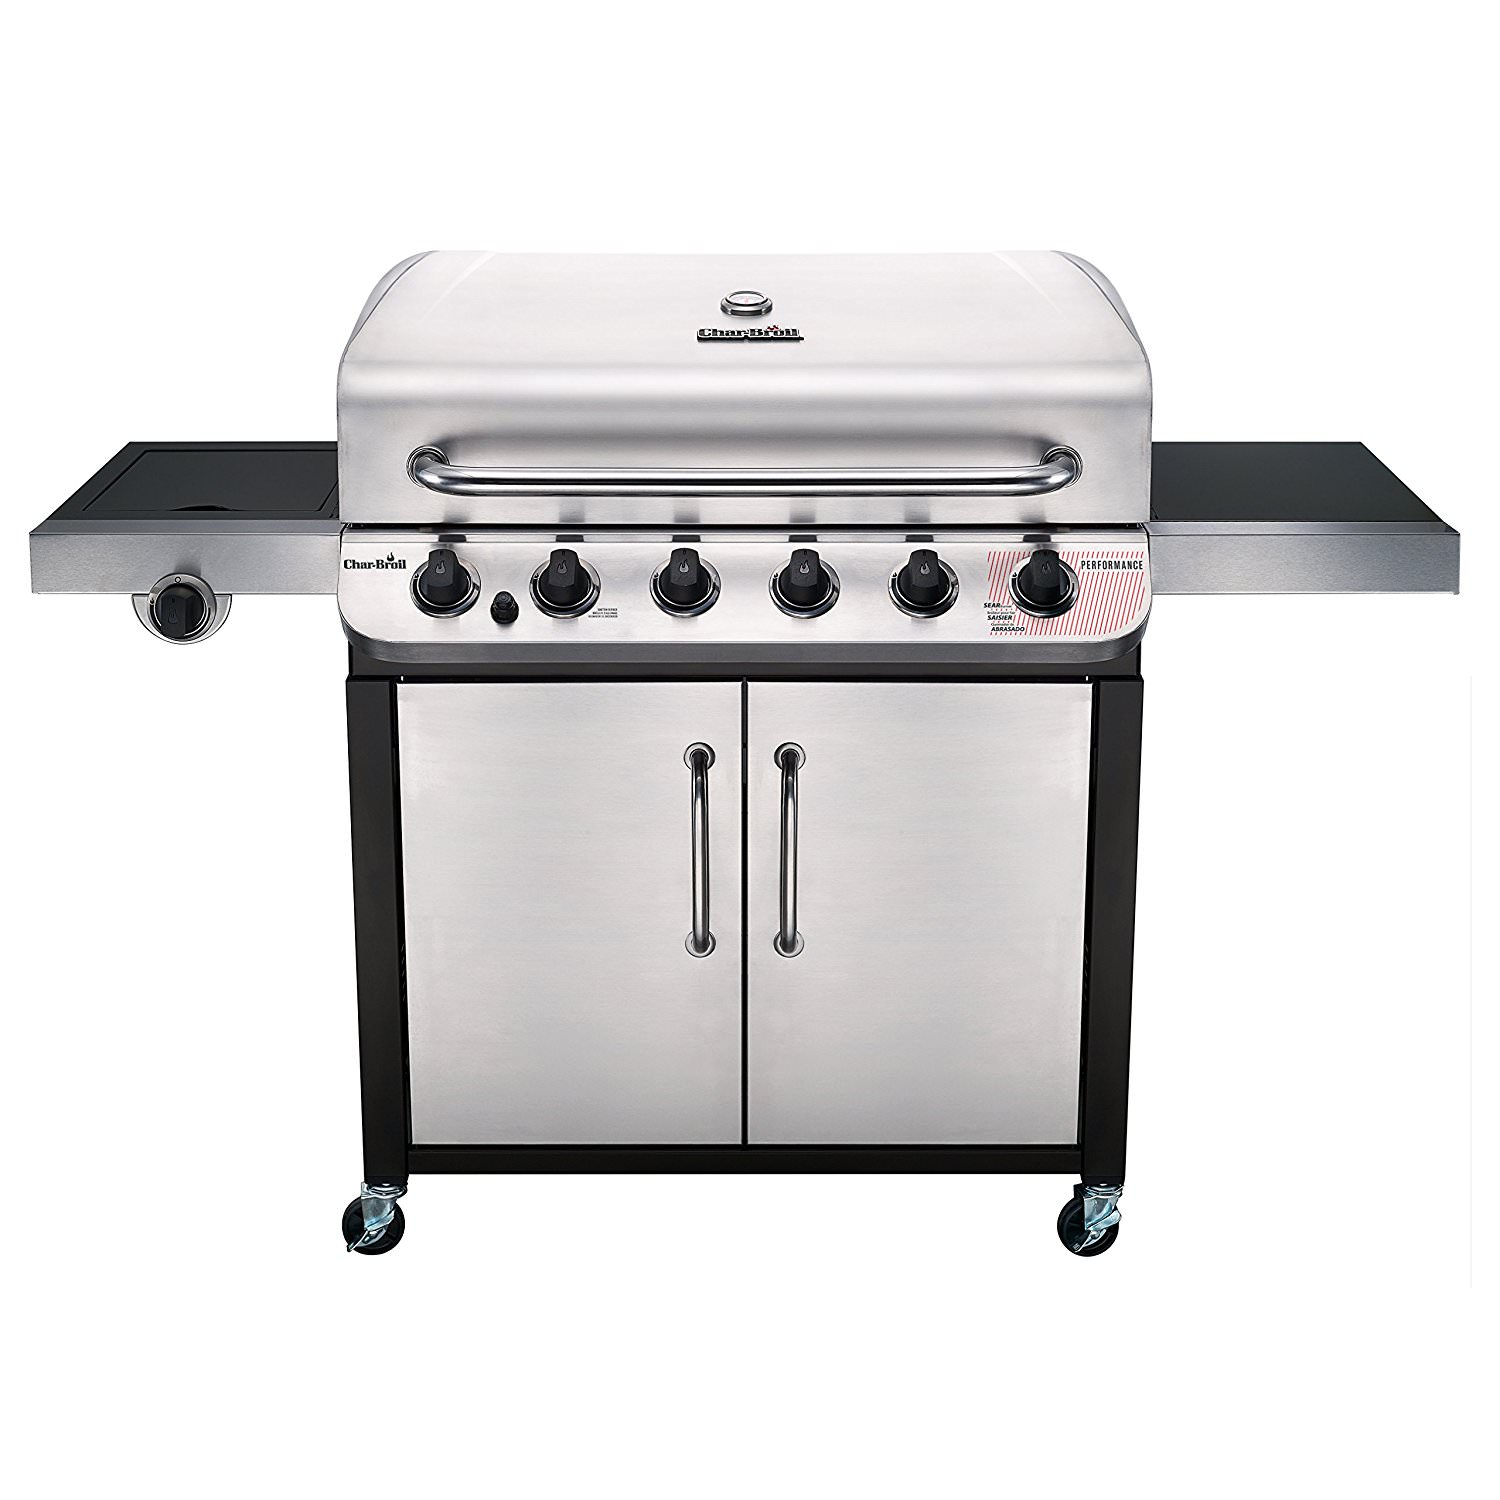 Char-Broil Performance Series 6-burner Liquid Propane Gas Grill with Side Burner, Black & Stainless - image 1 of 11